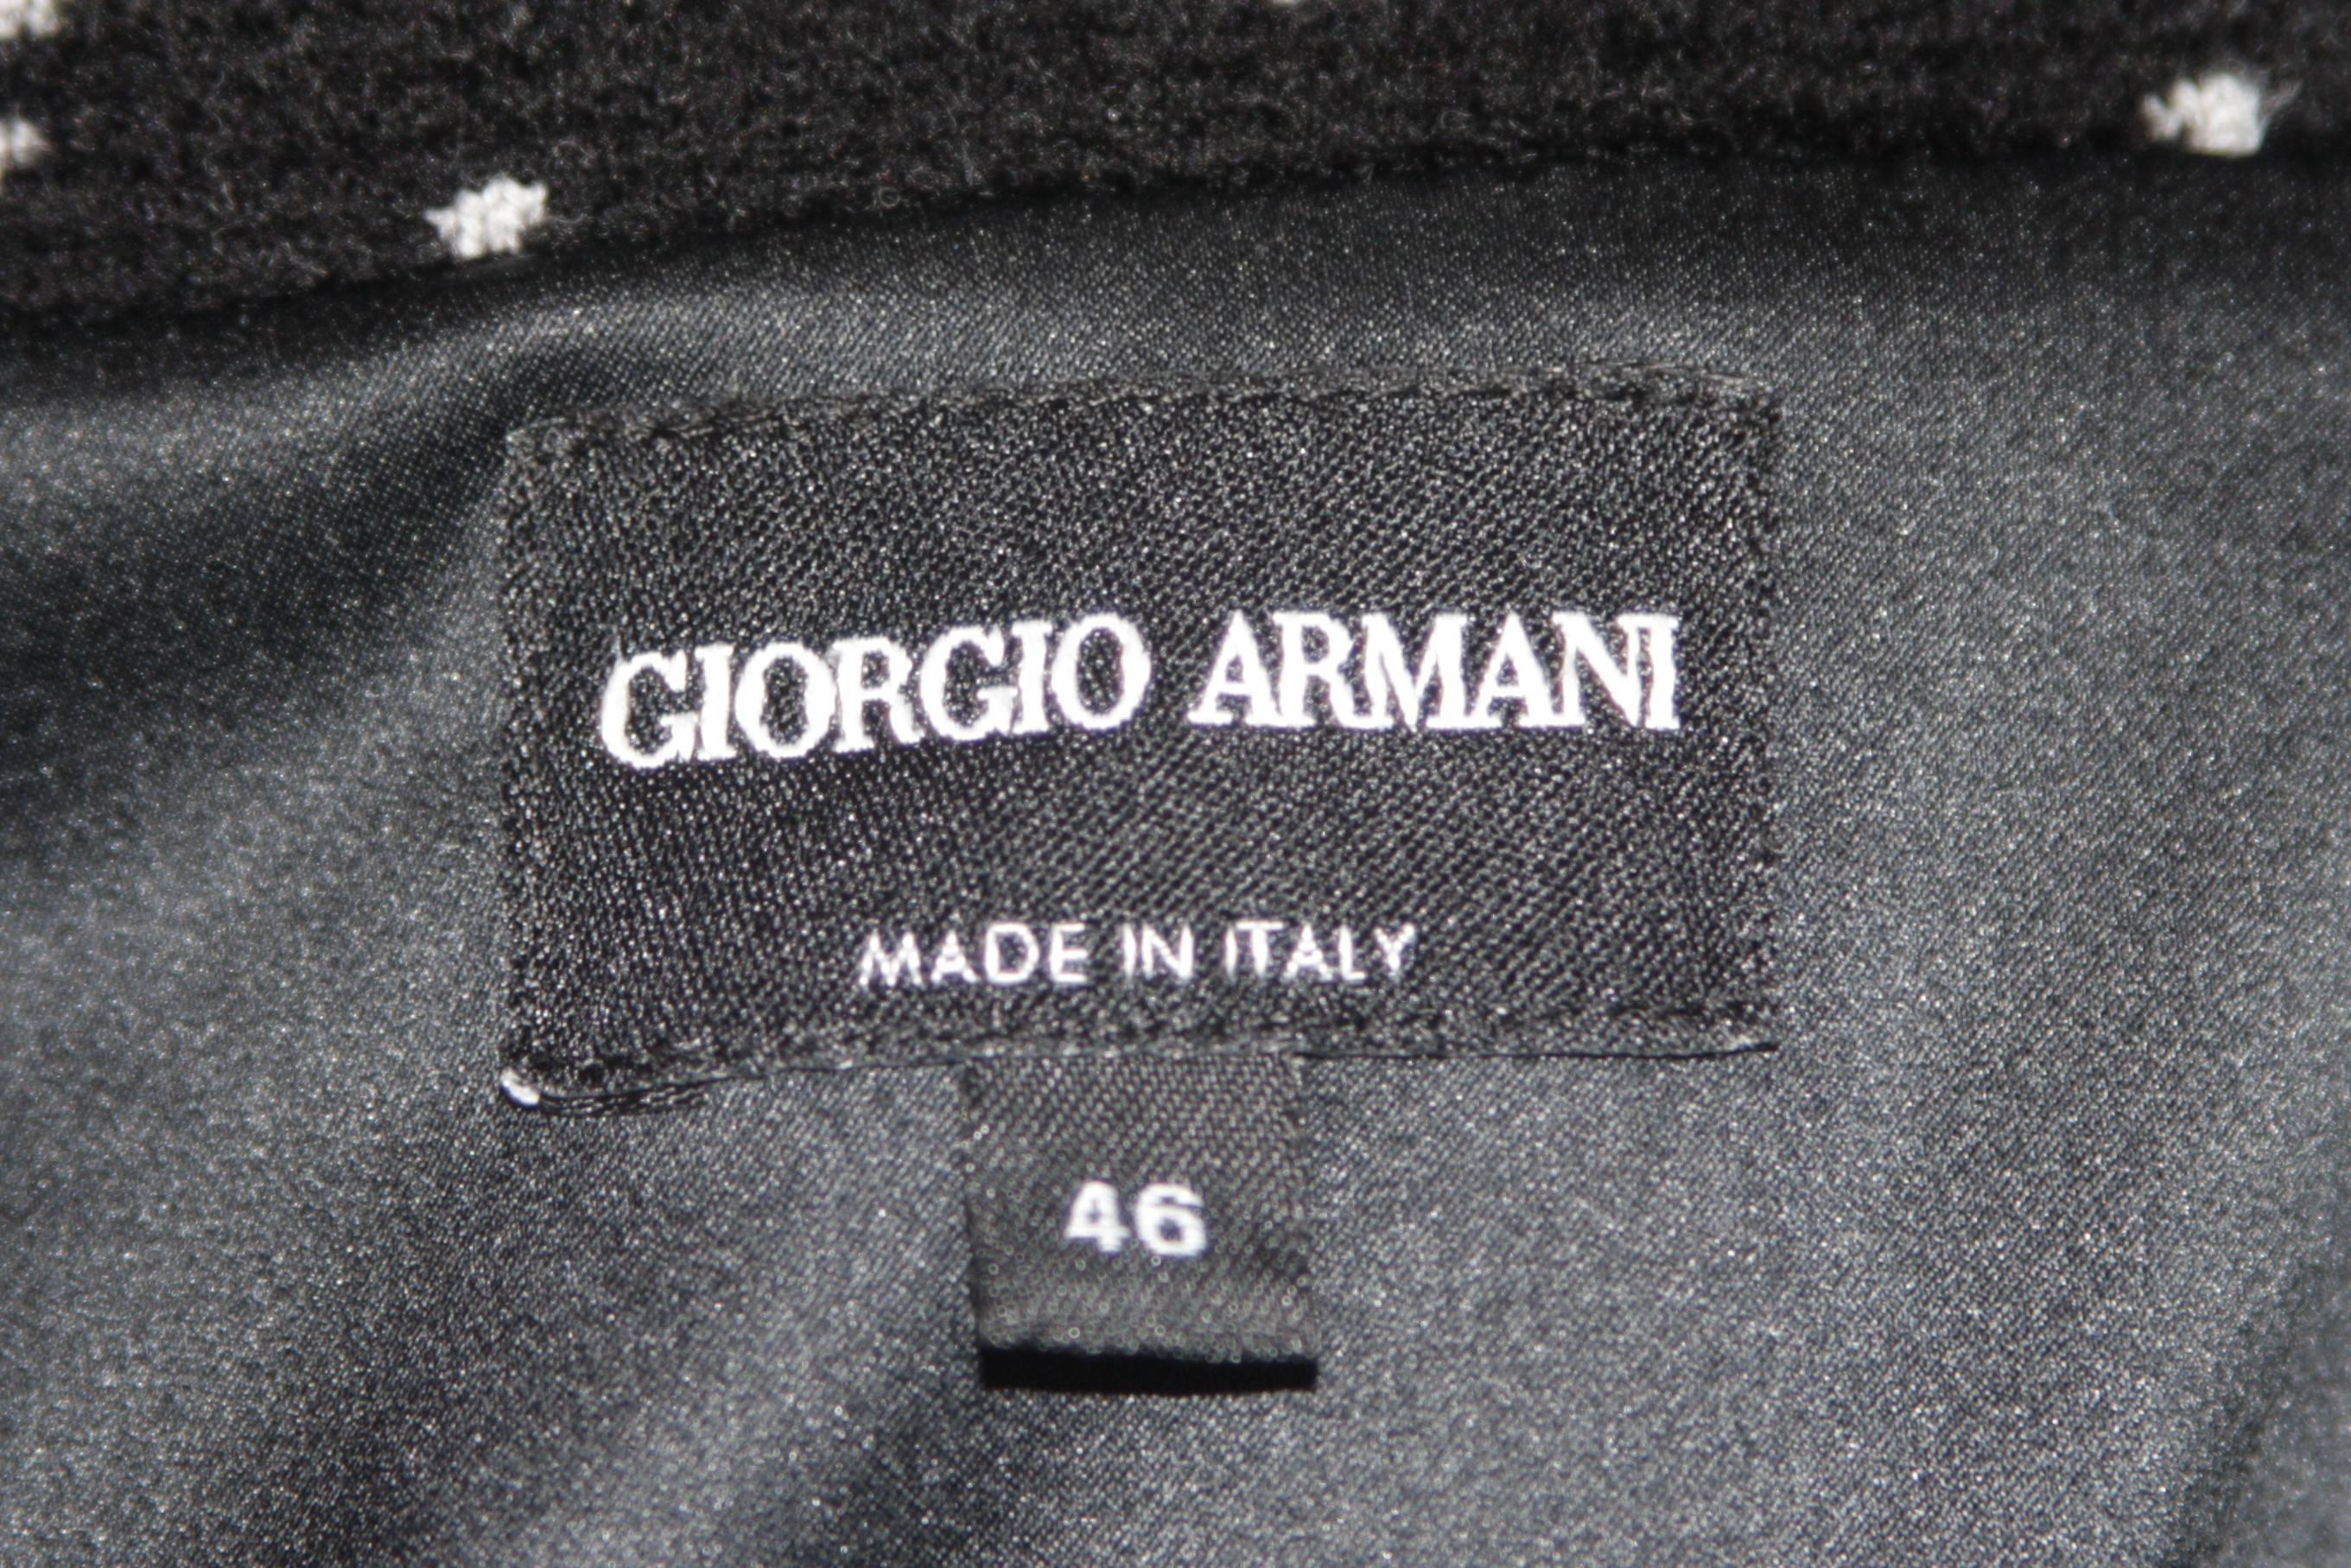 Giorgio Armani Black and White Speckle Wool Blend Jacket with Piping ...